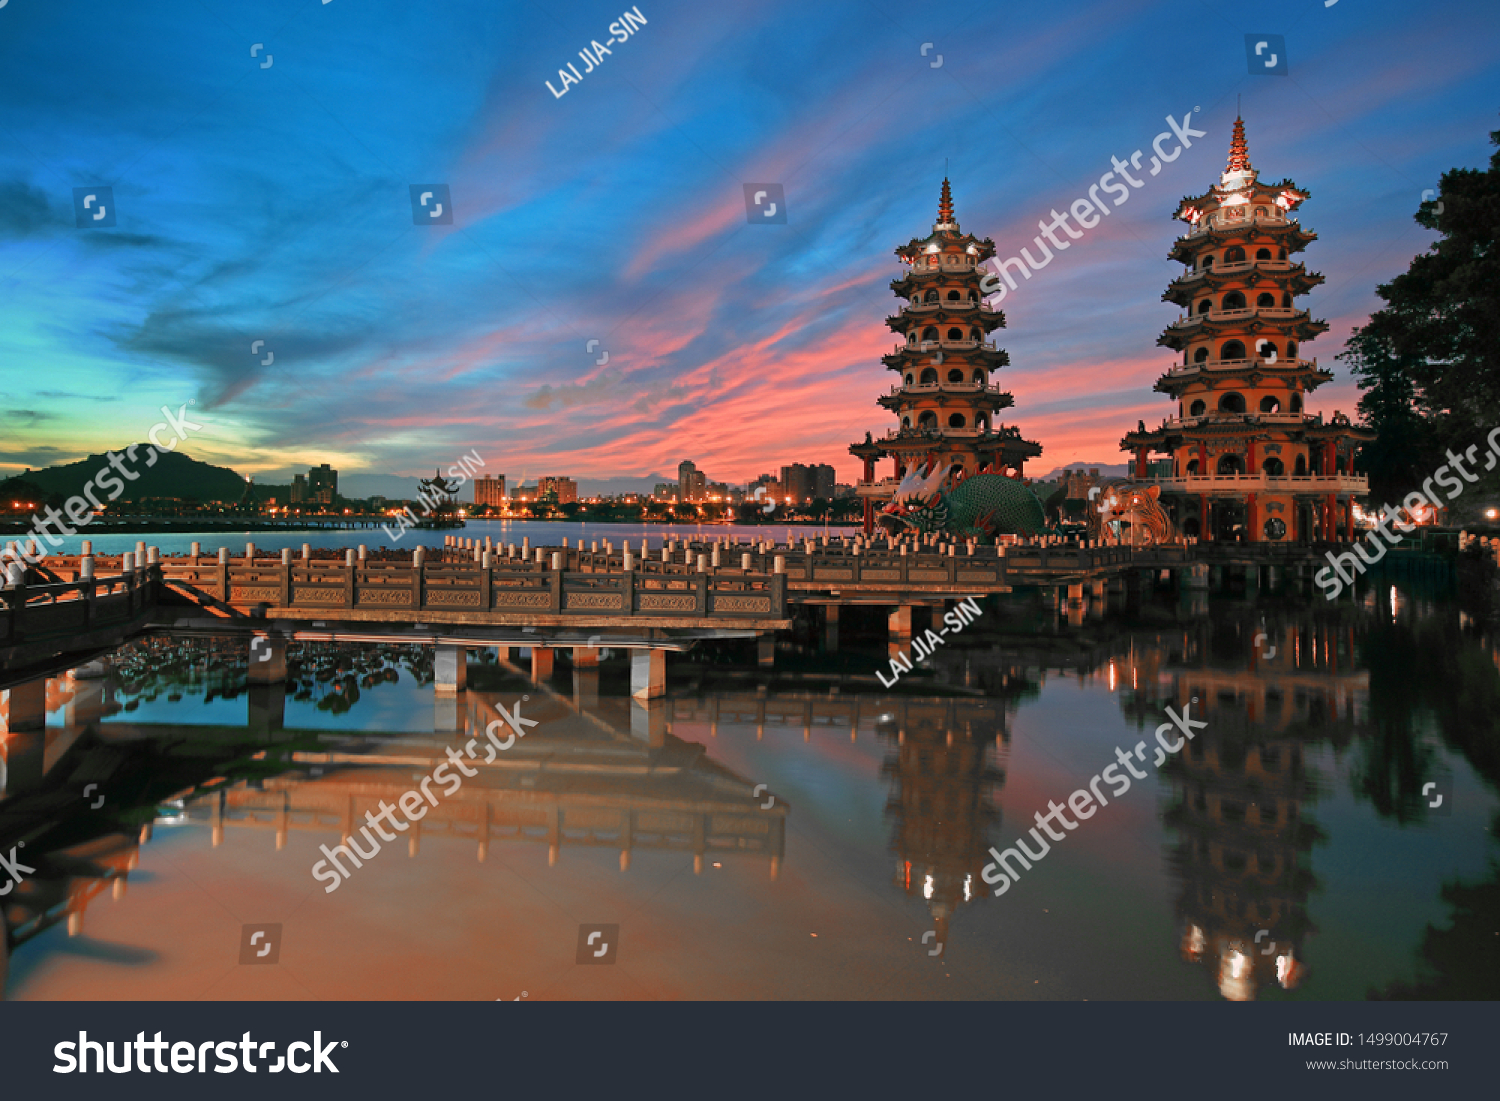 Sunrise and sunrise reflection at Dragon Tiger Tower in the lake,Taiwan #1499004767